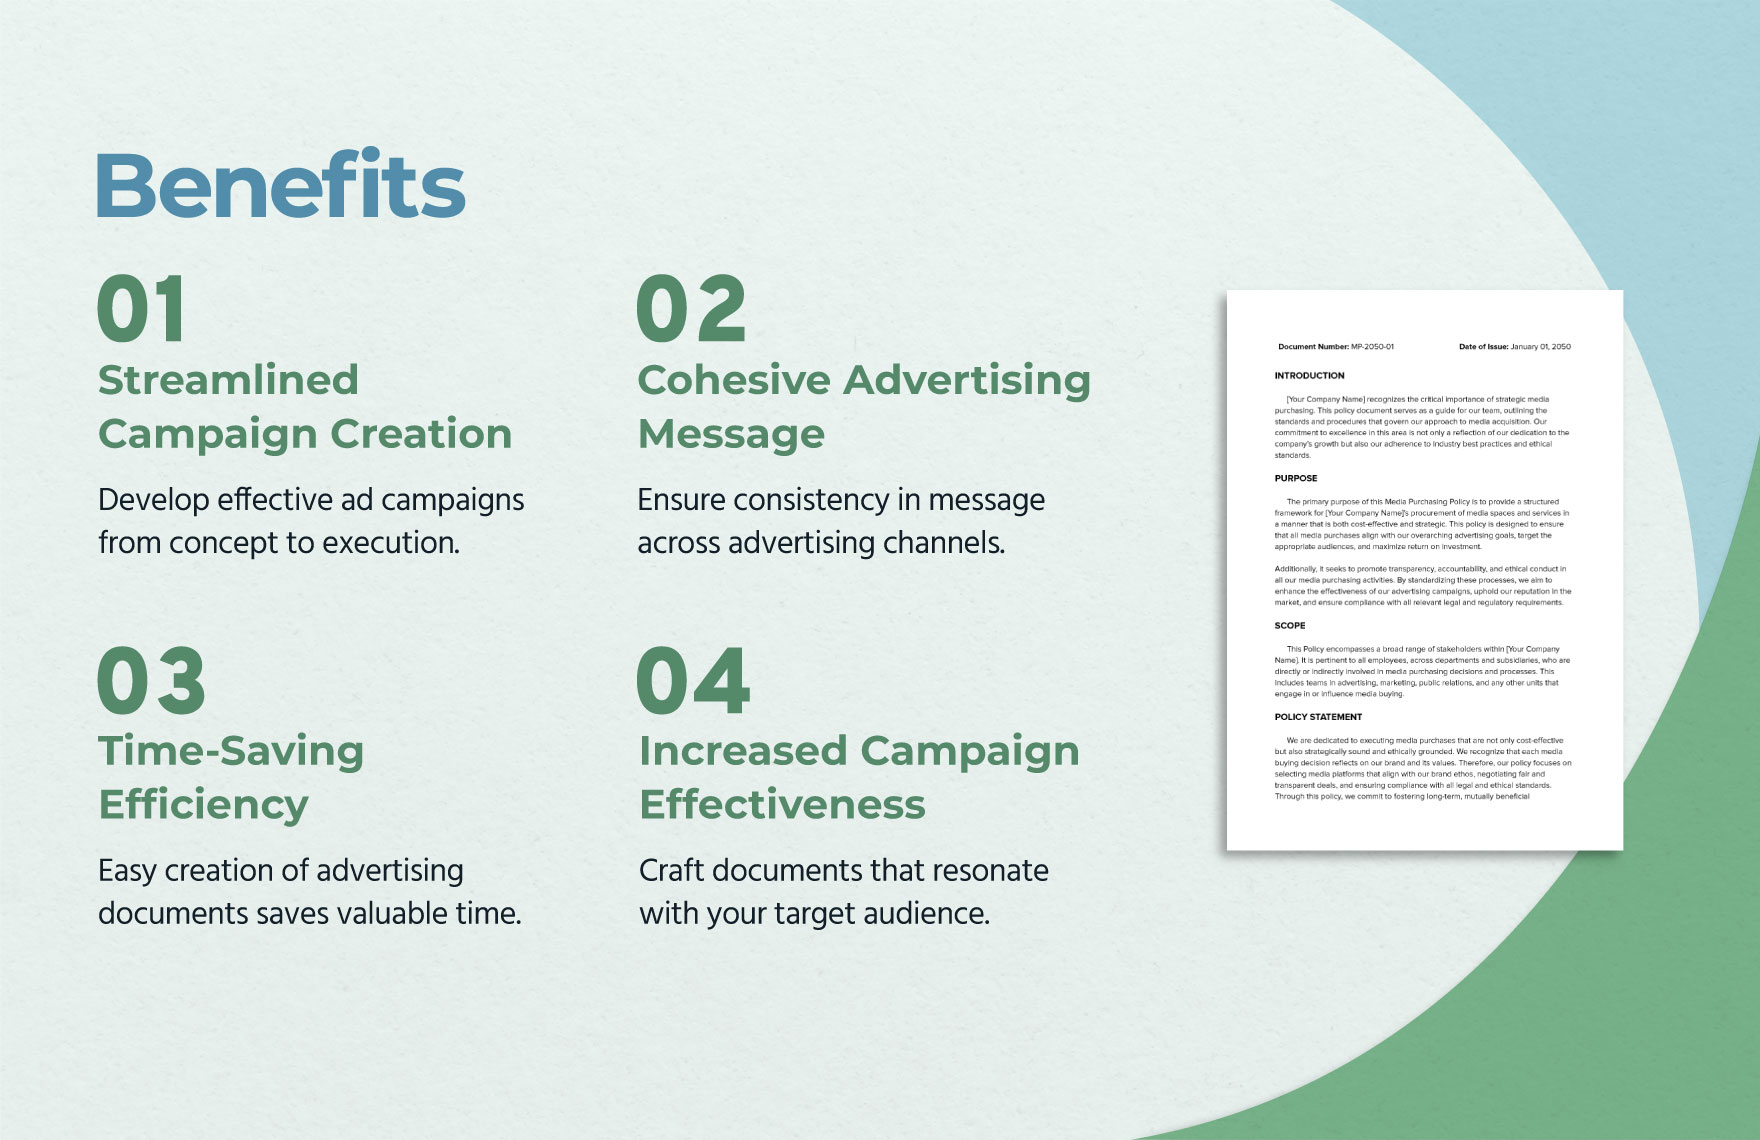 Advertising Media Purchasing Policy Document Template